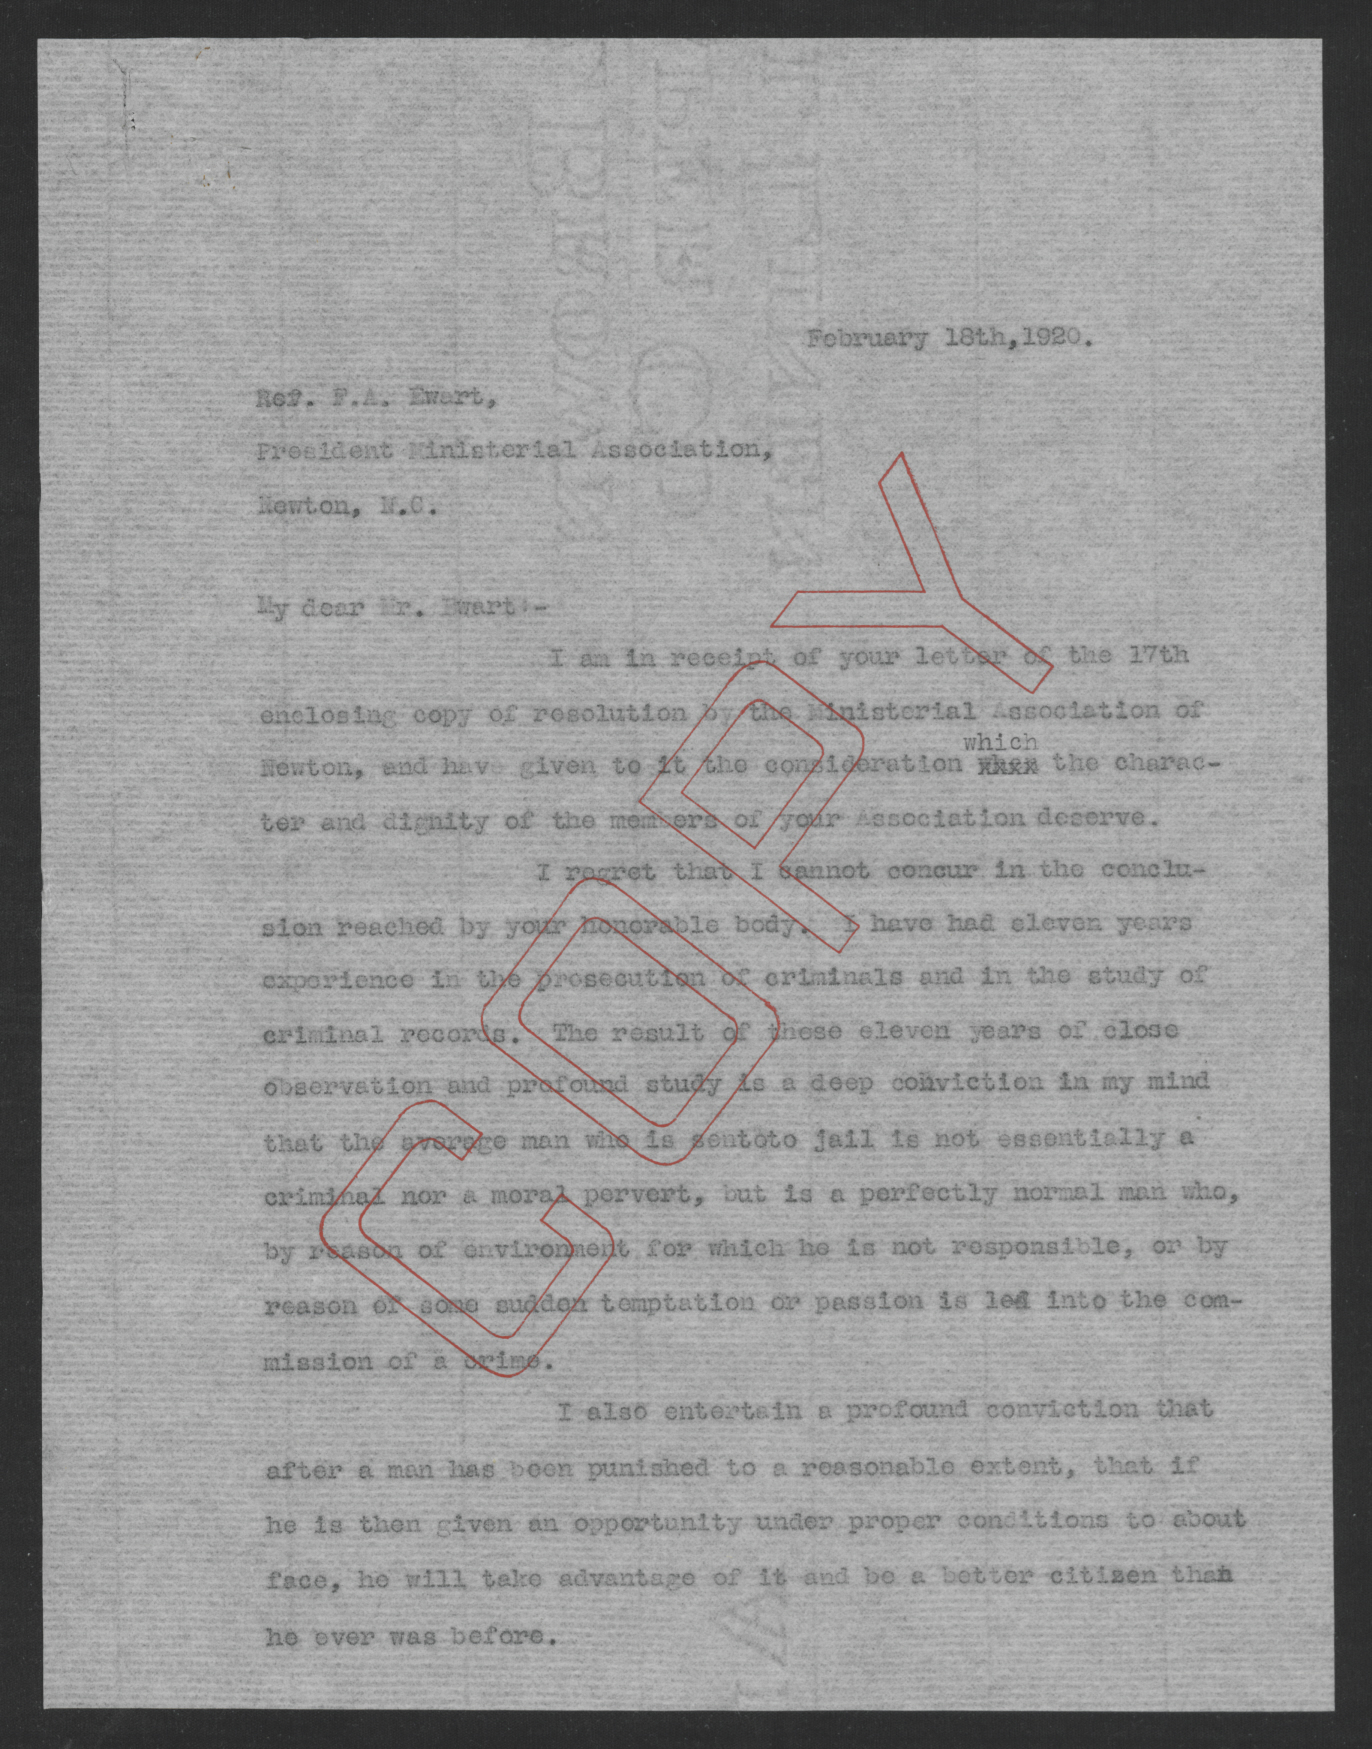 Letter from Bickett to Ewart, February 18, 1920, page 1